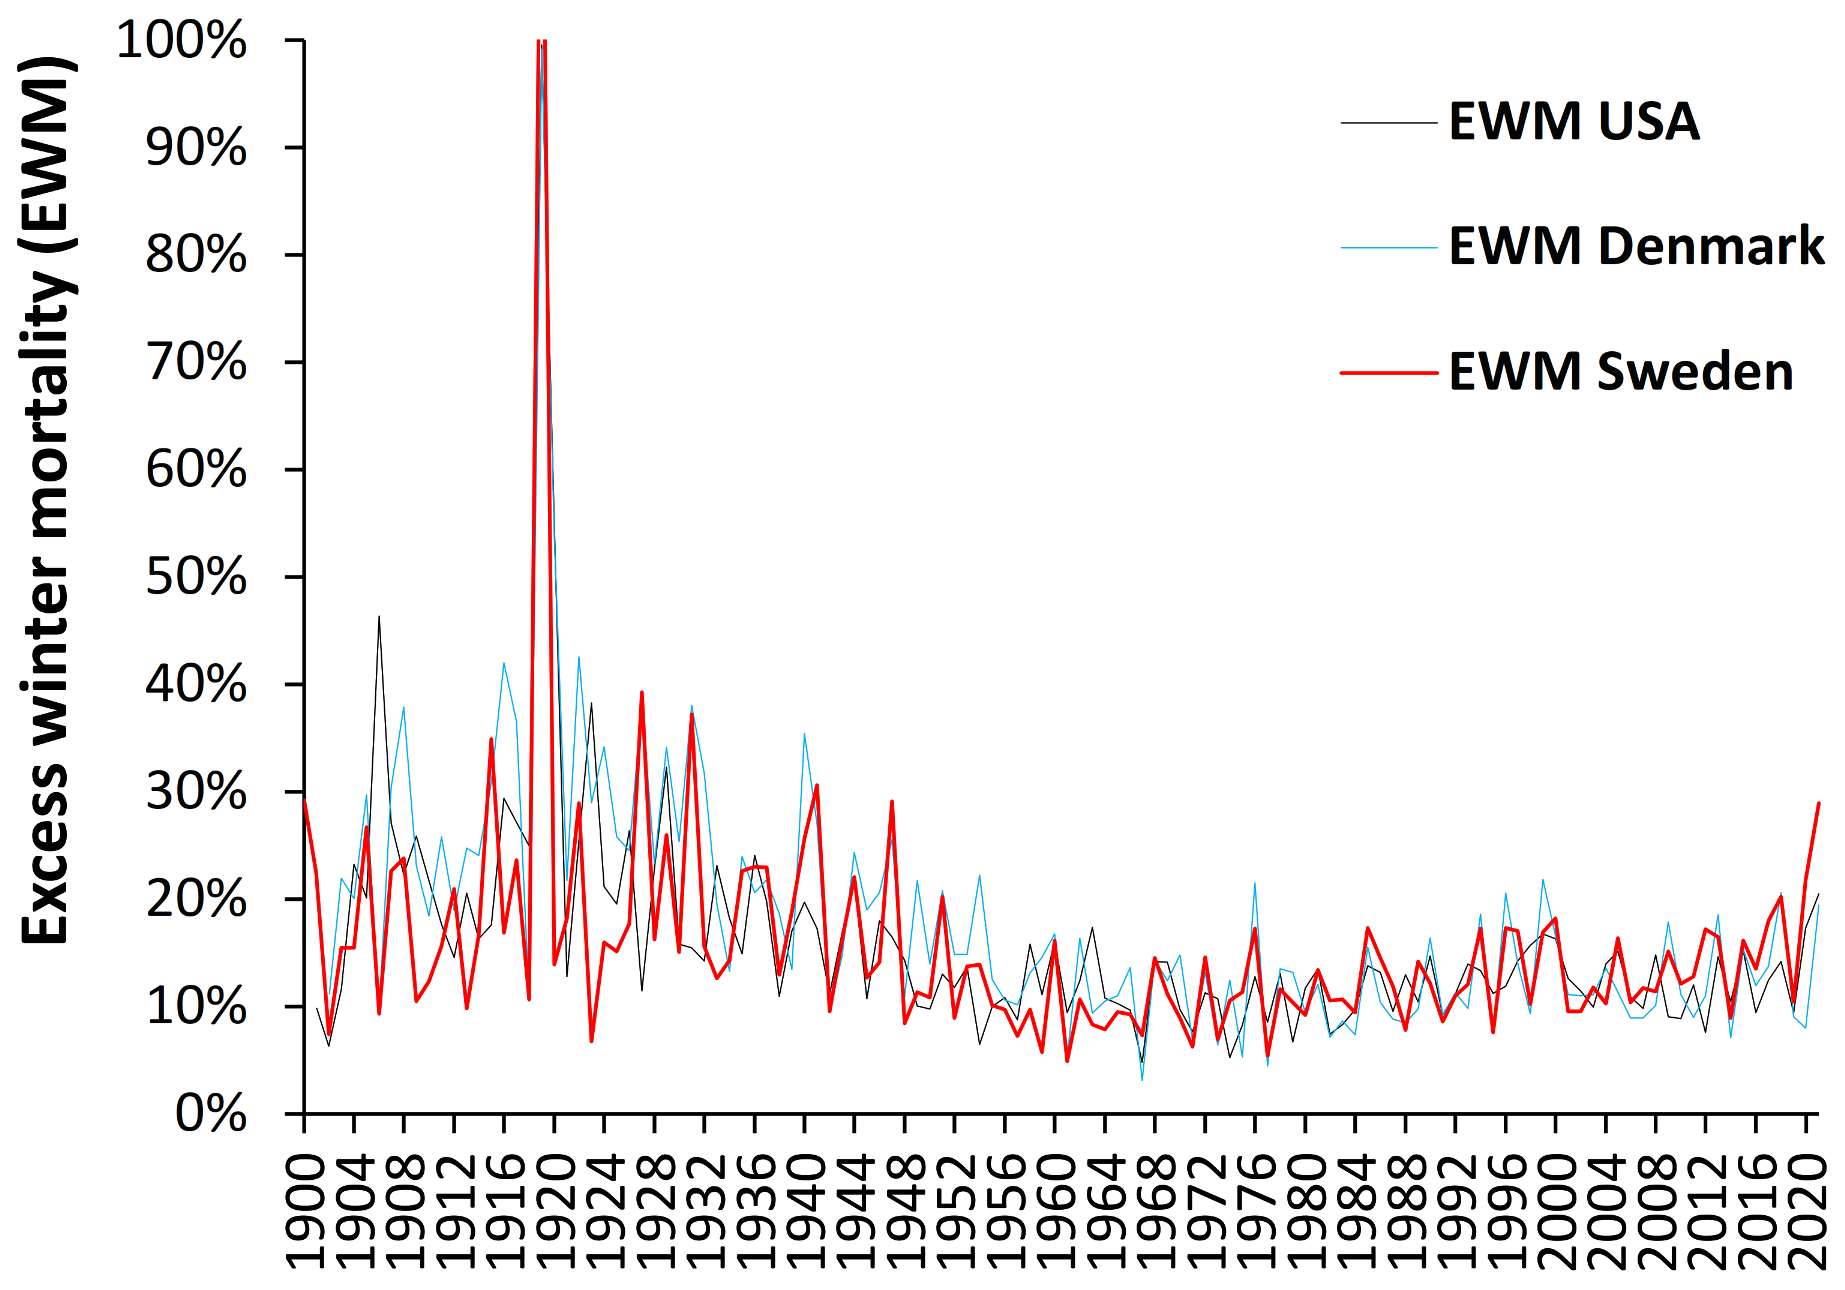 IJERPH | Free Full-Text | Trends in Excess Winter Mortality (EWM) from 1900/01  to 2019/20&mdash;Evidence for a Complex System of Multiple Long-Term Trends